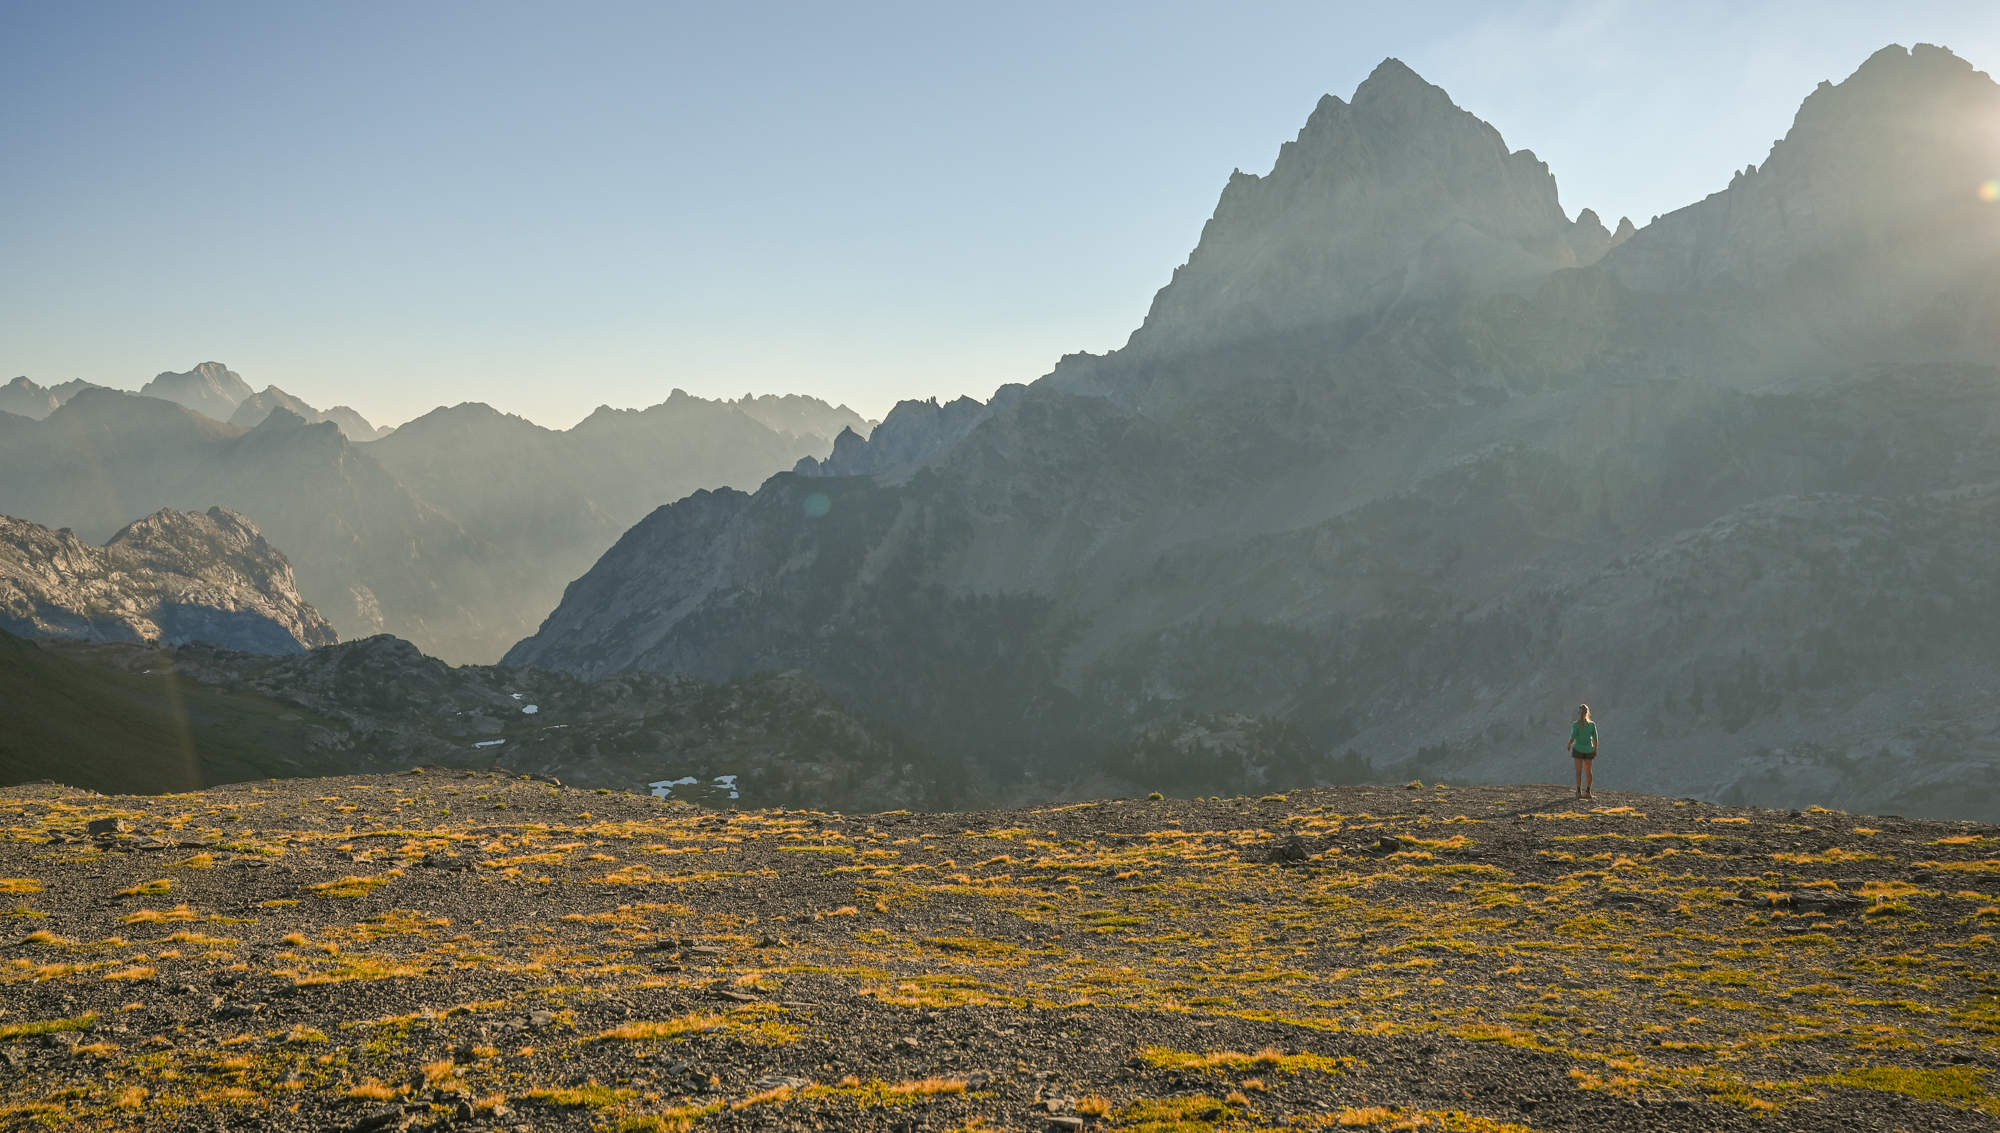 Sunrise at Hurricane Pass, the best view on the Teton Crest Trail